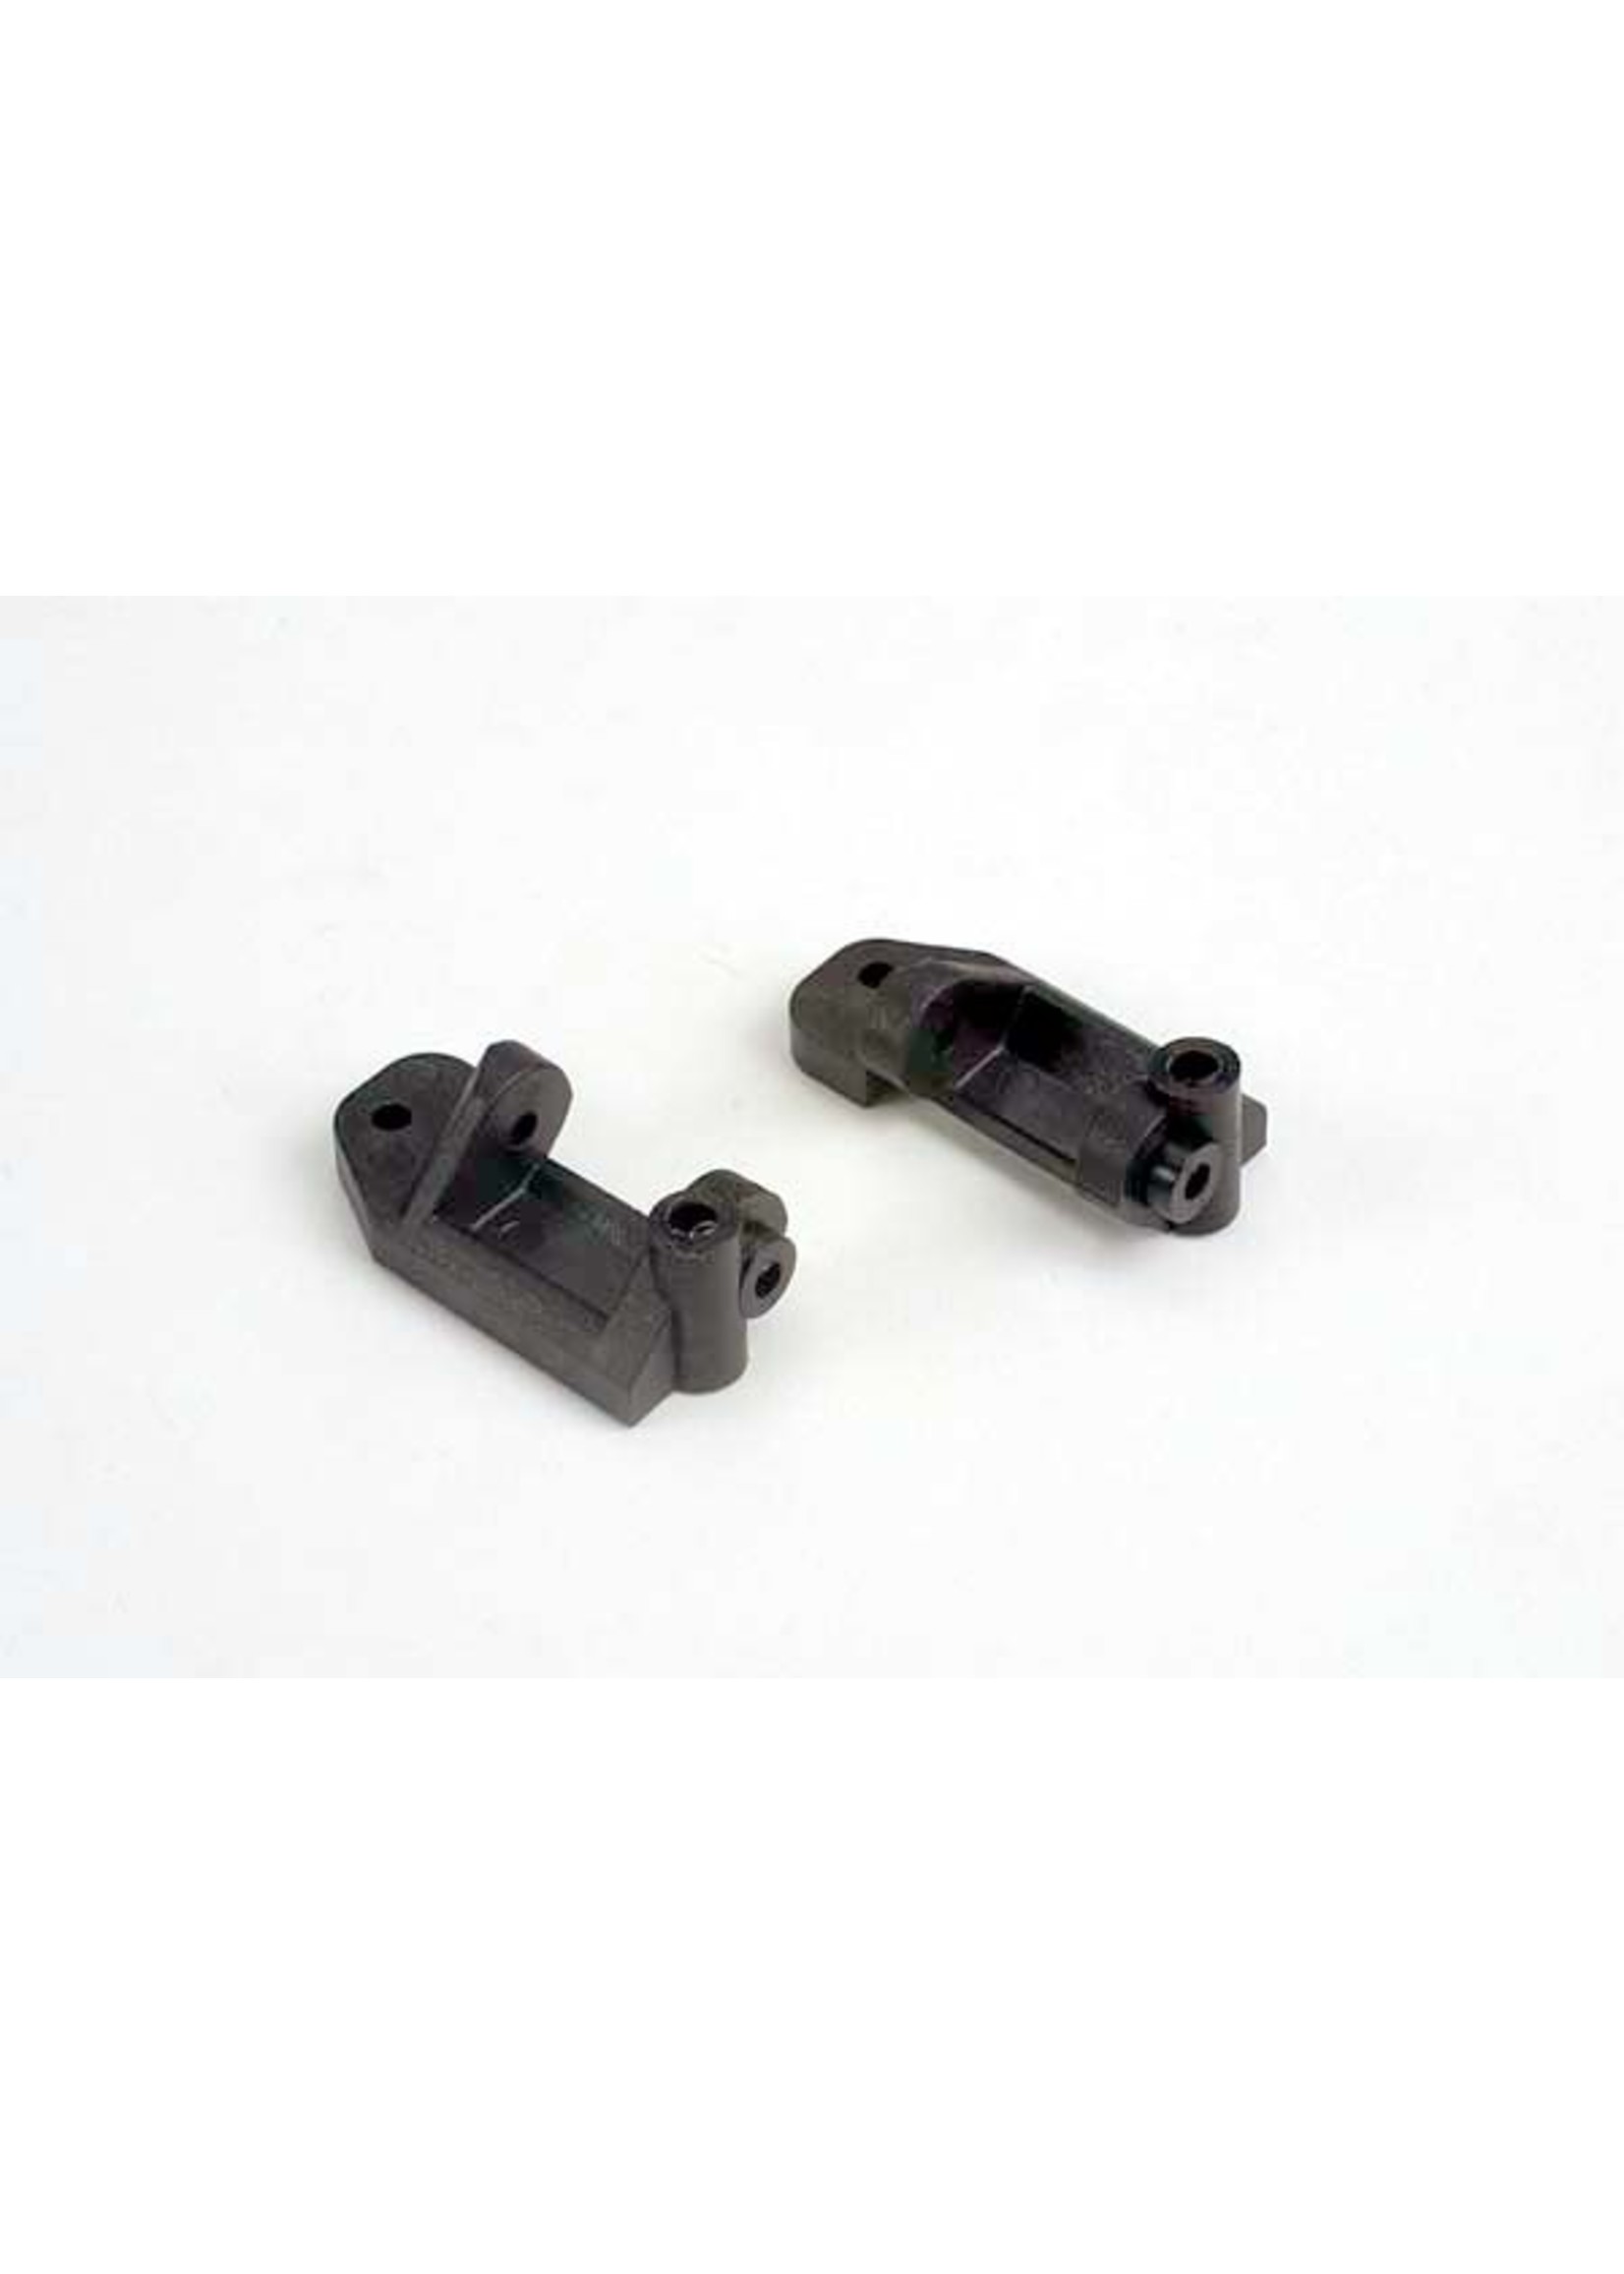 Traxxas 2432 - Caster Blocks, Left and Right